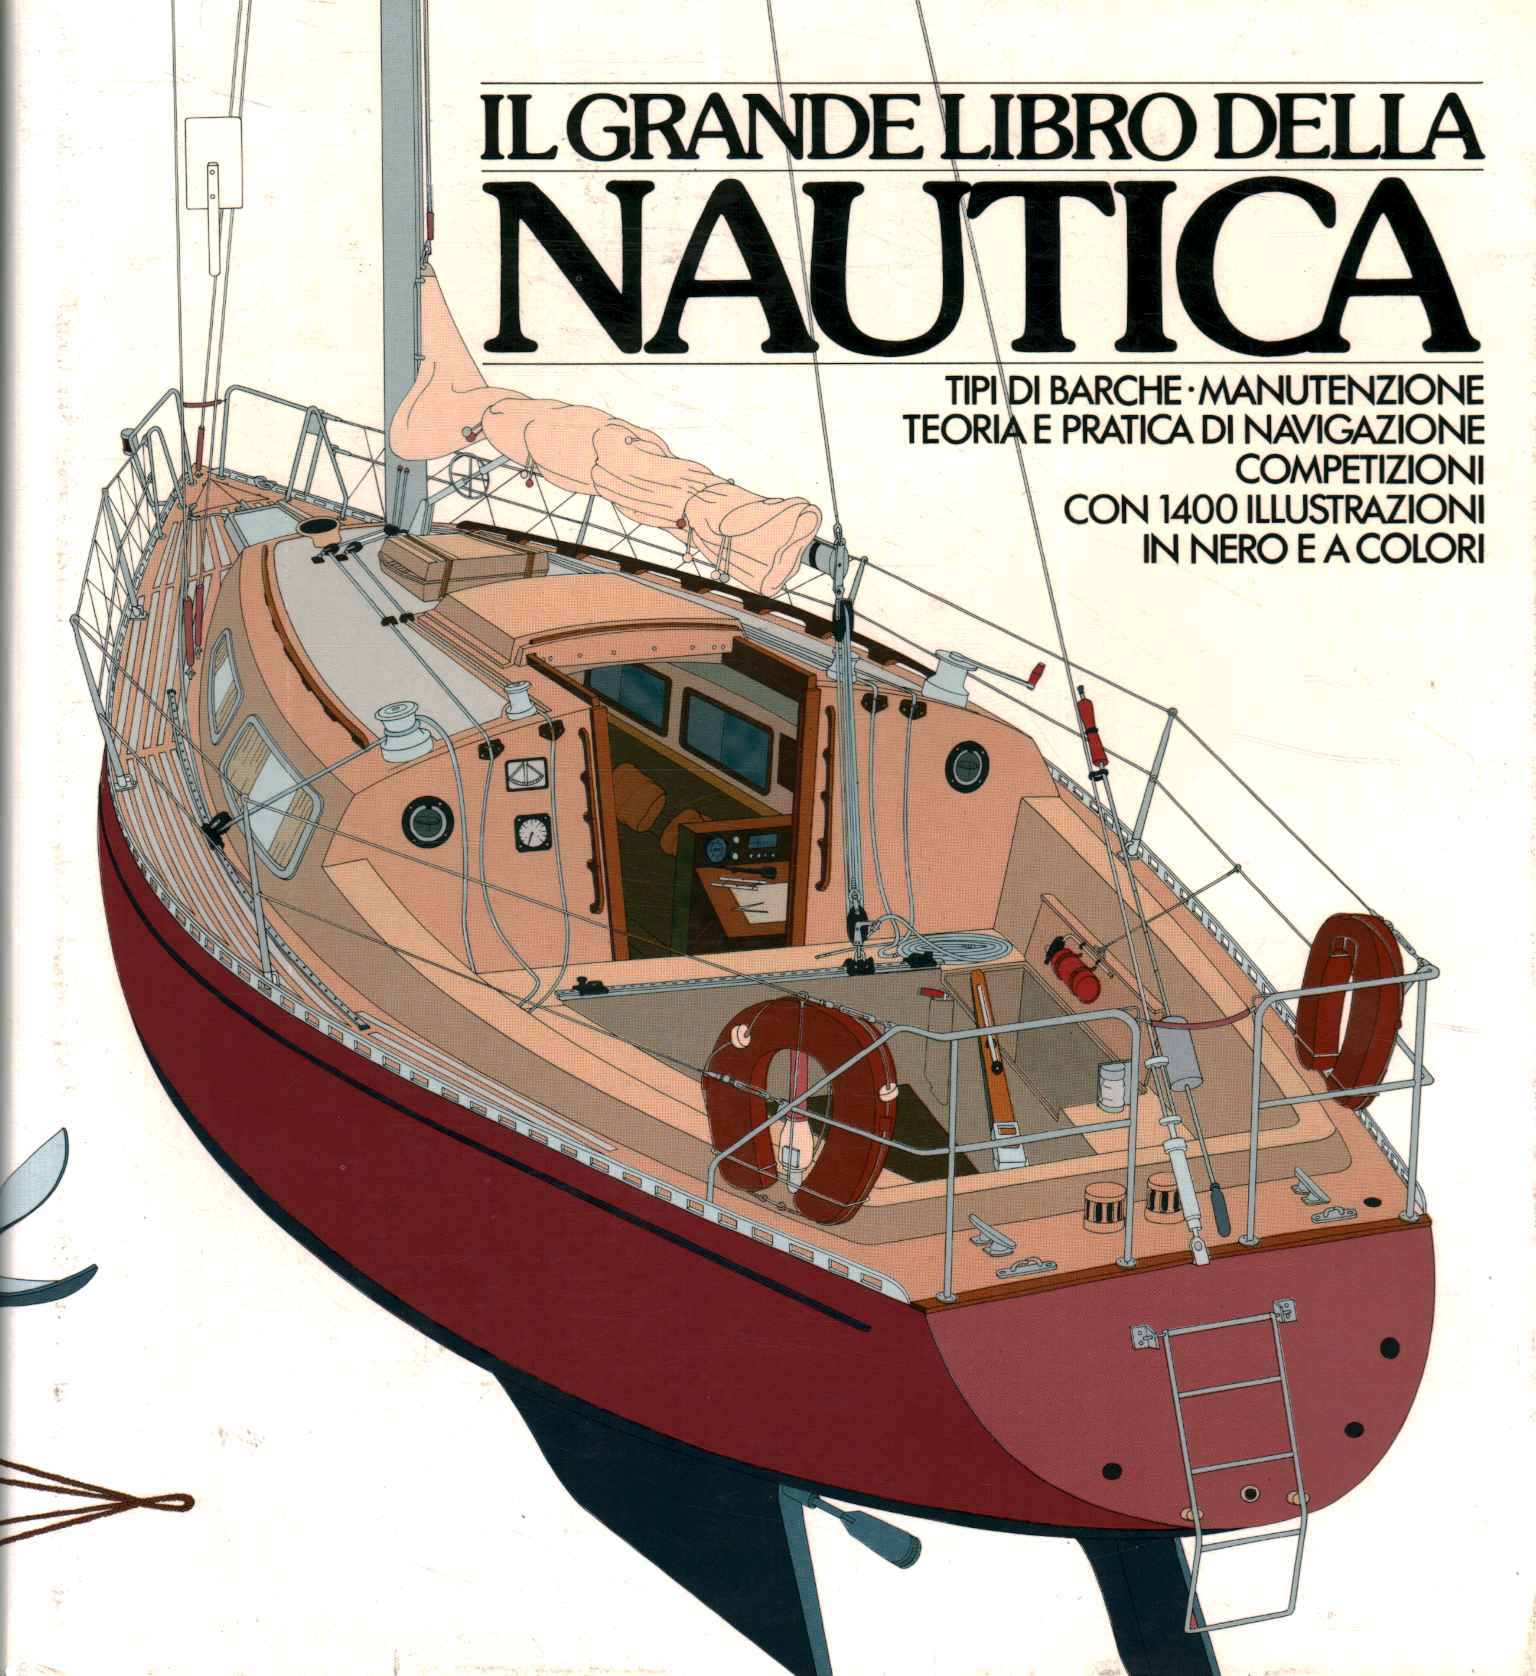 The great book of sailing